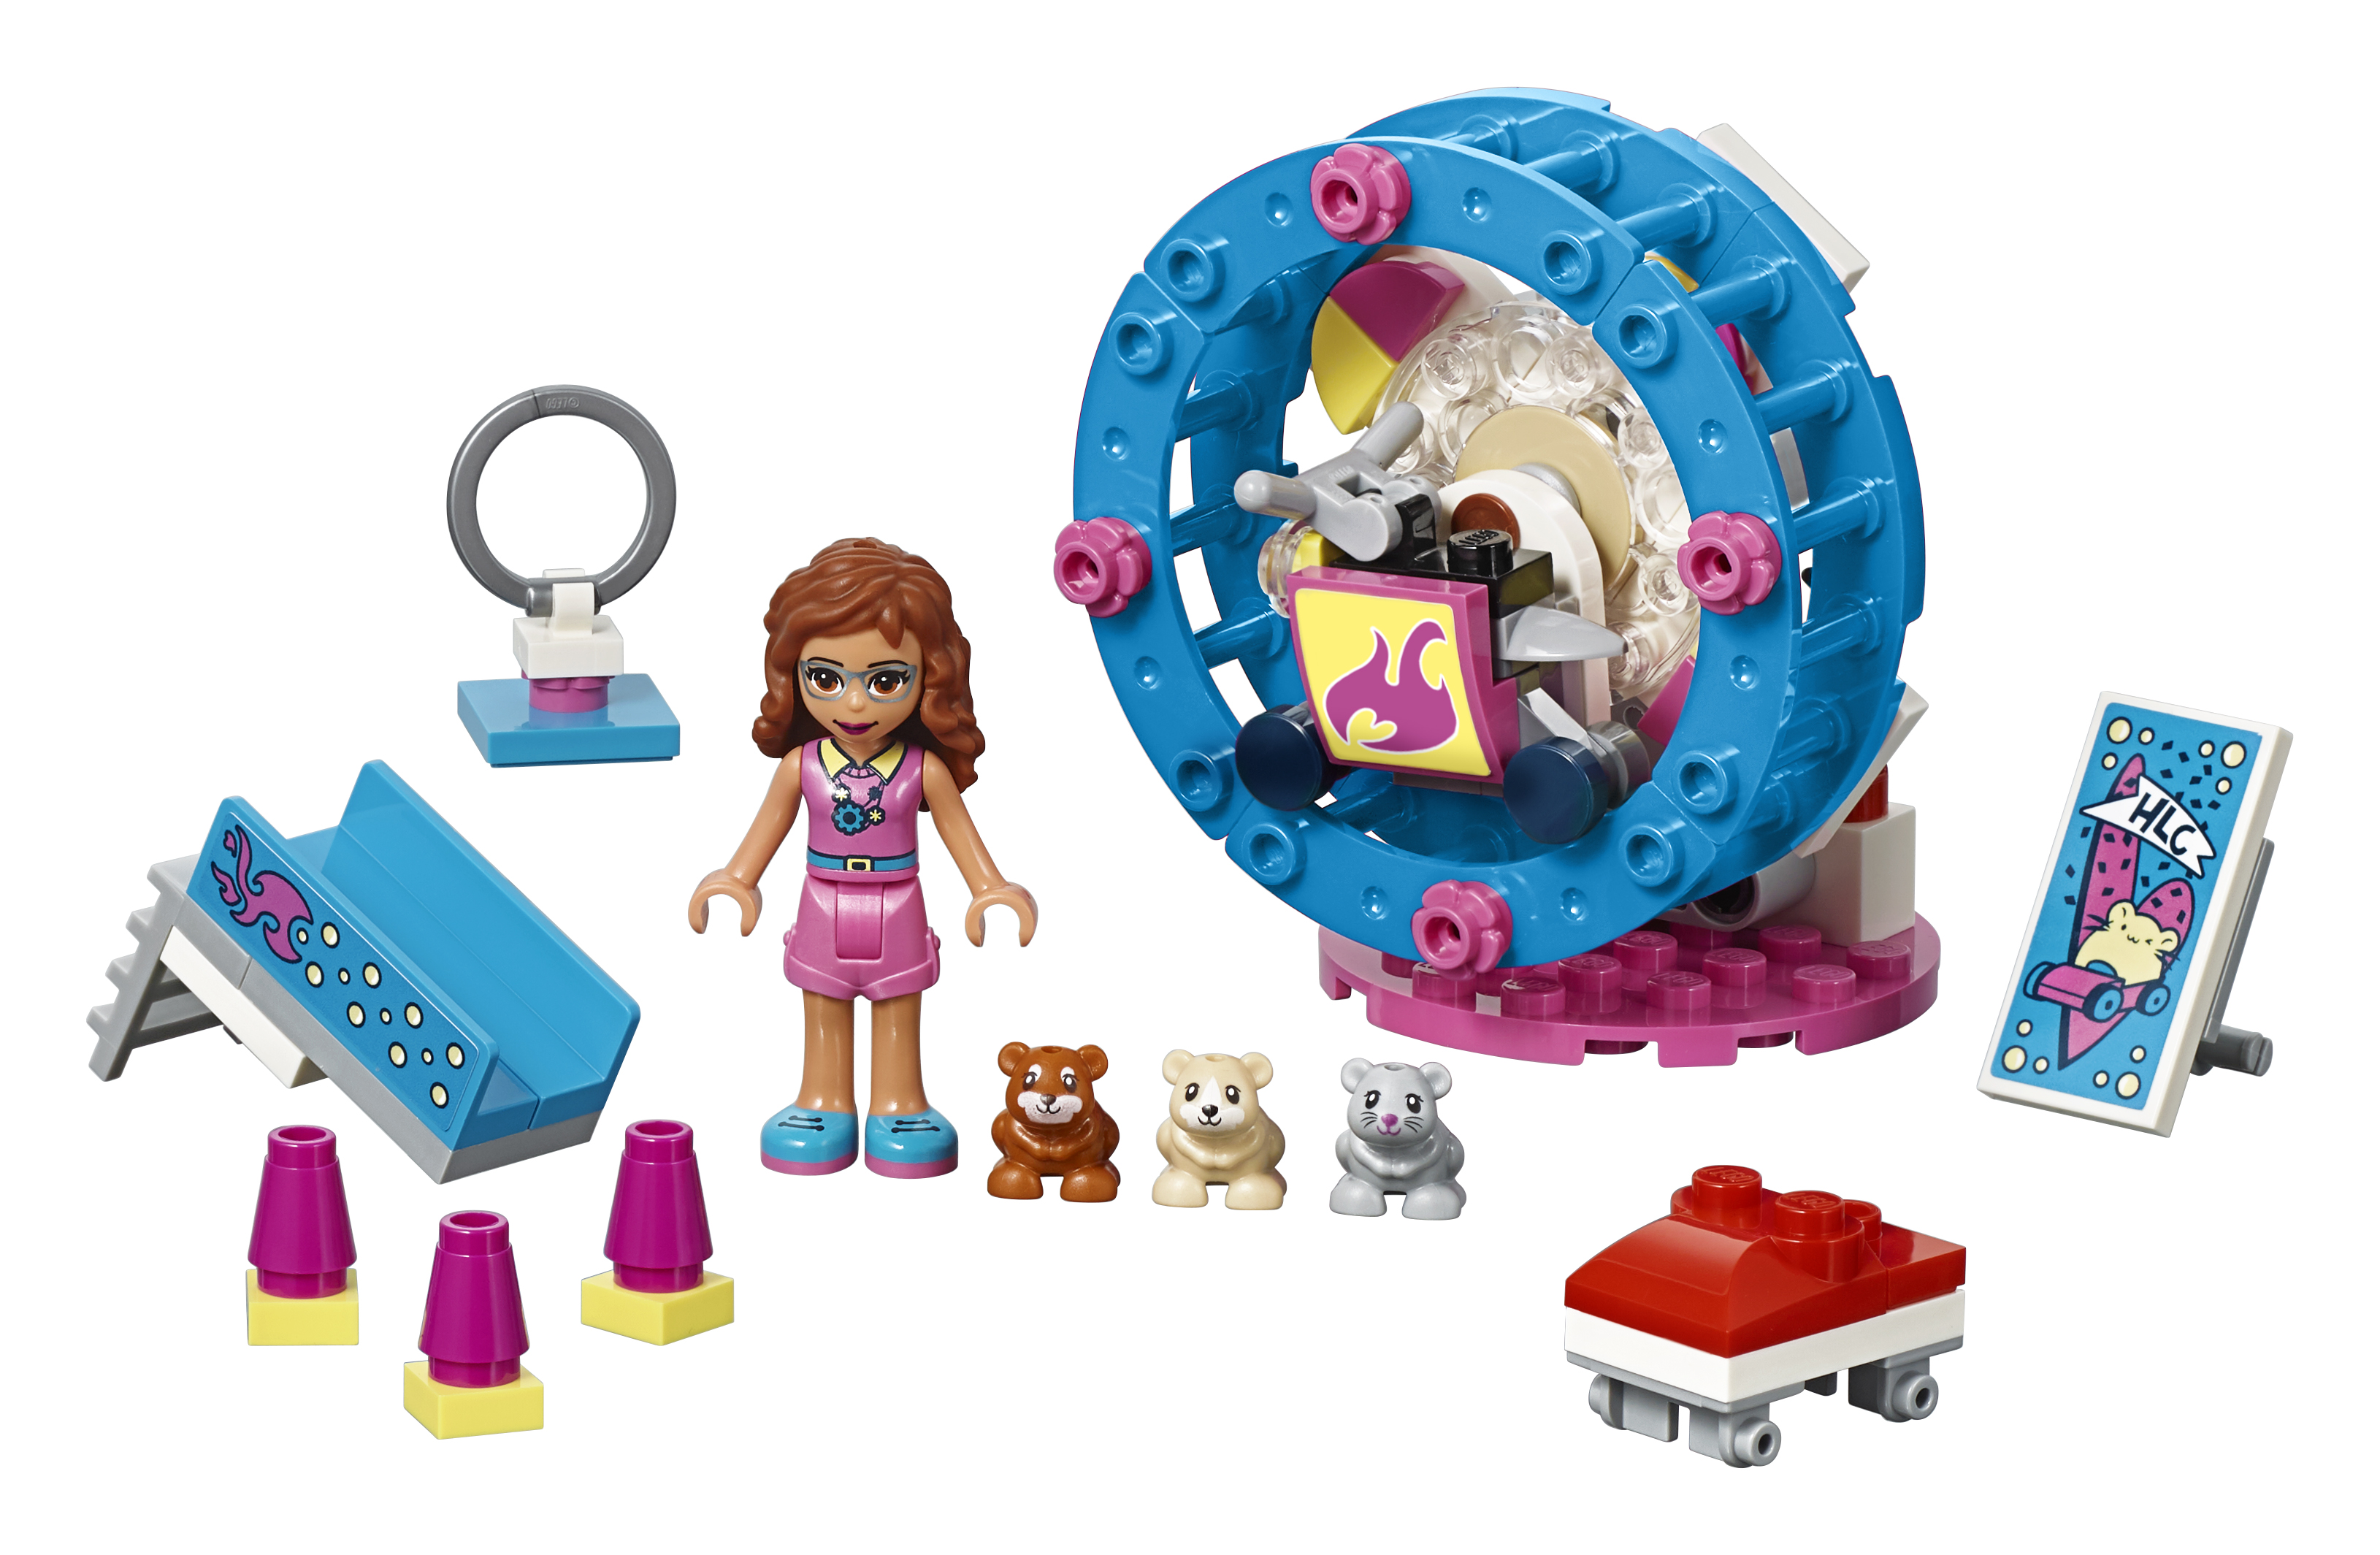 LEGO Friends Olivia's Hamster Playground 41383 9 (81 Pieces) - image 3 of 8